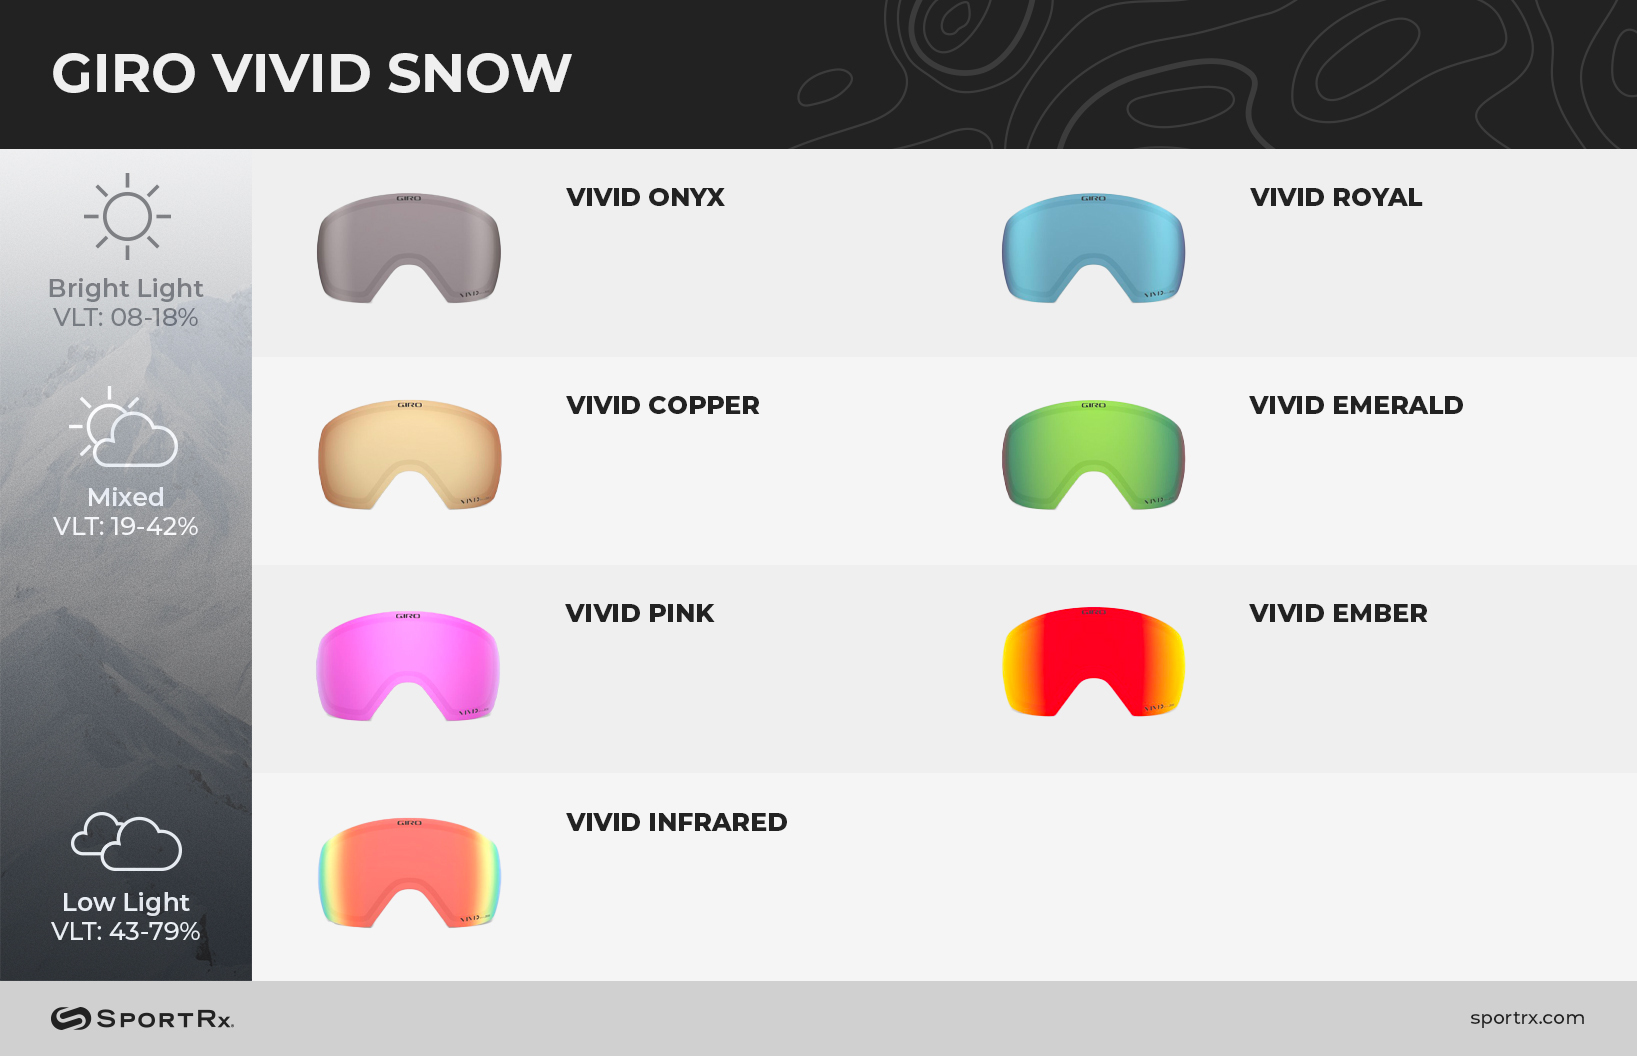 giro vivid snow goggles lens chart with snowboarding lenses for bright light, everyday light conditions, and low light skiing weather